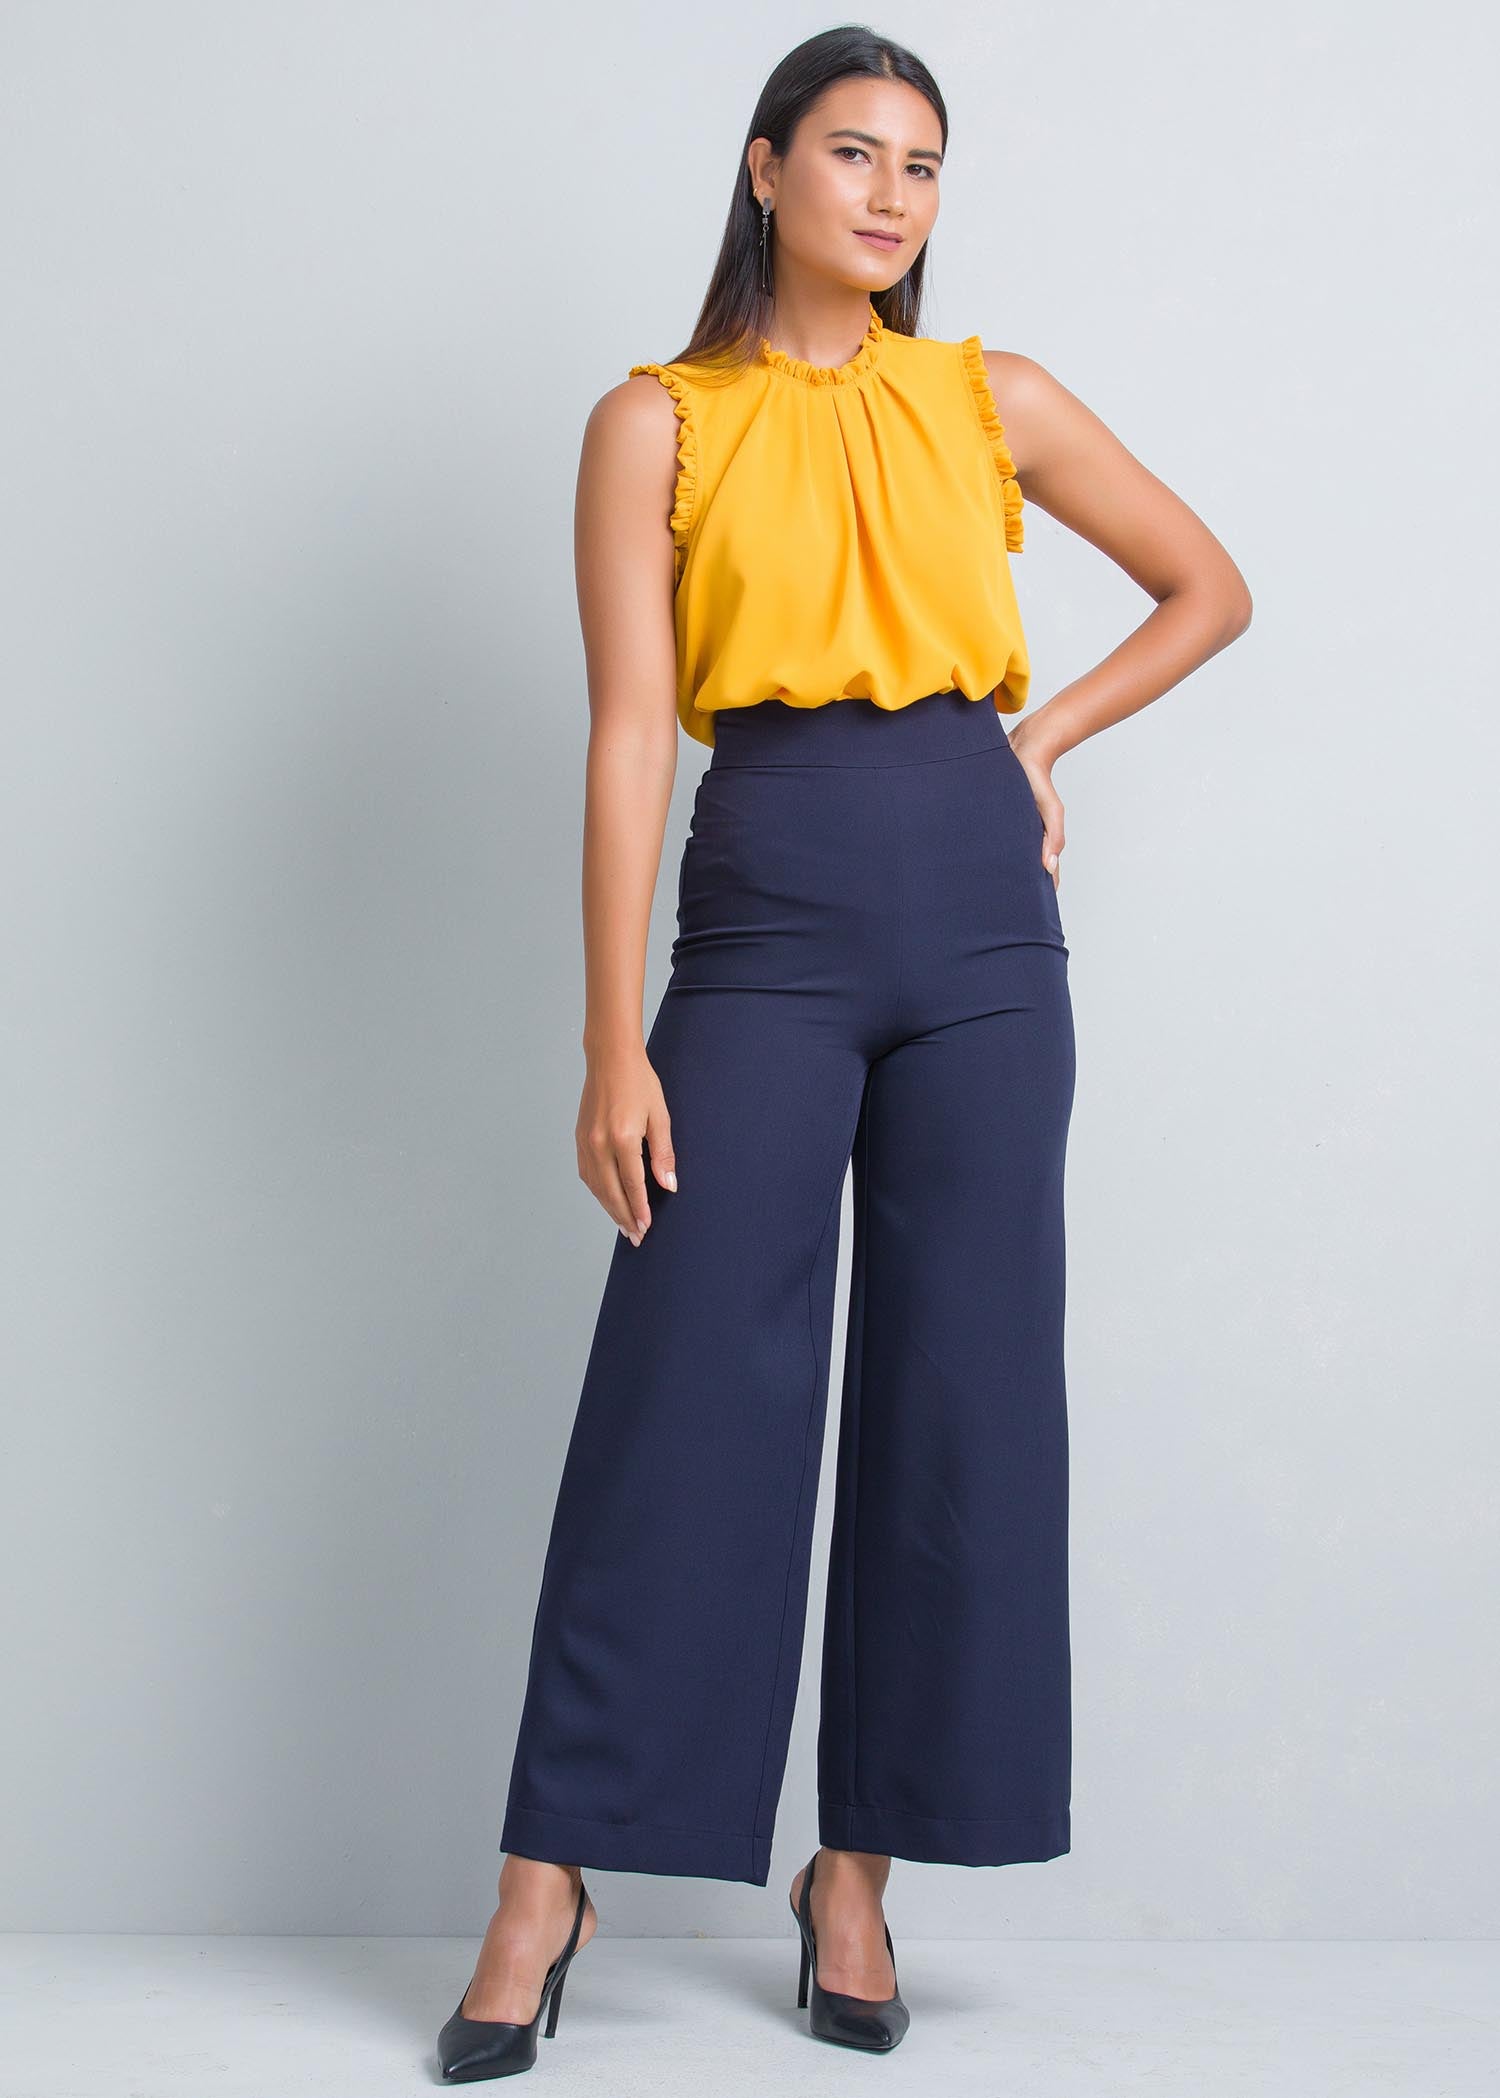 Sleeveless blouse with frill and pleat detailing